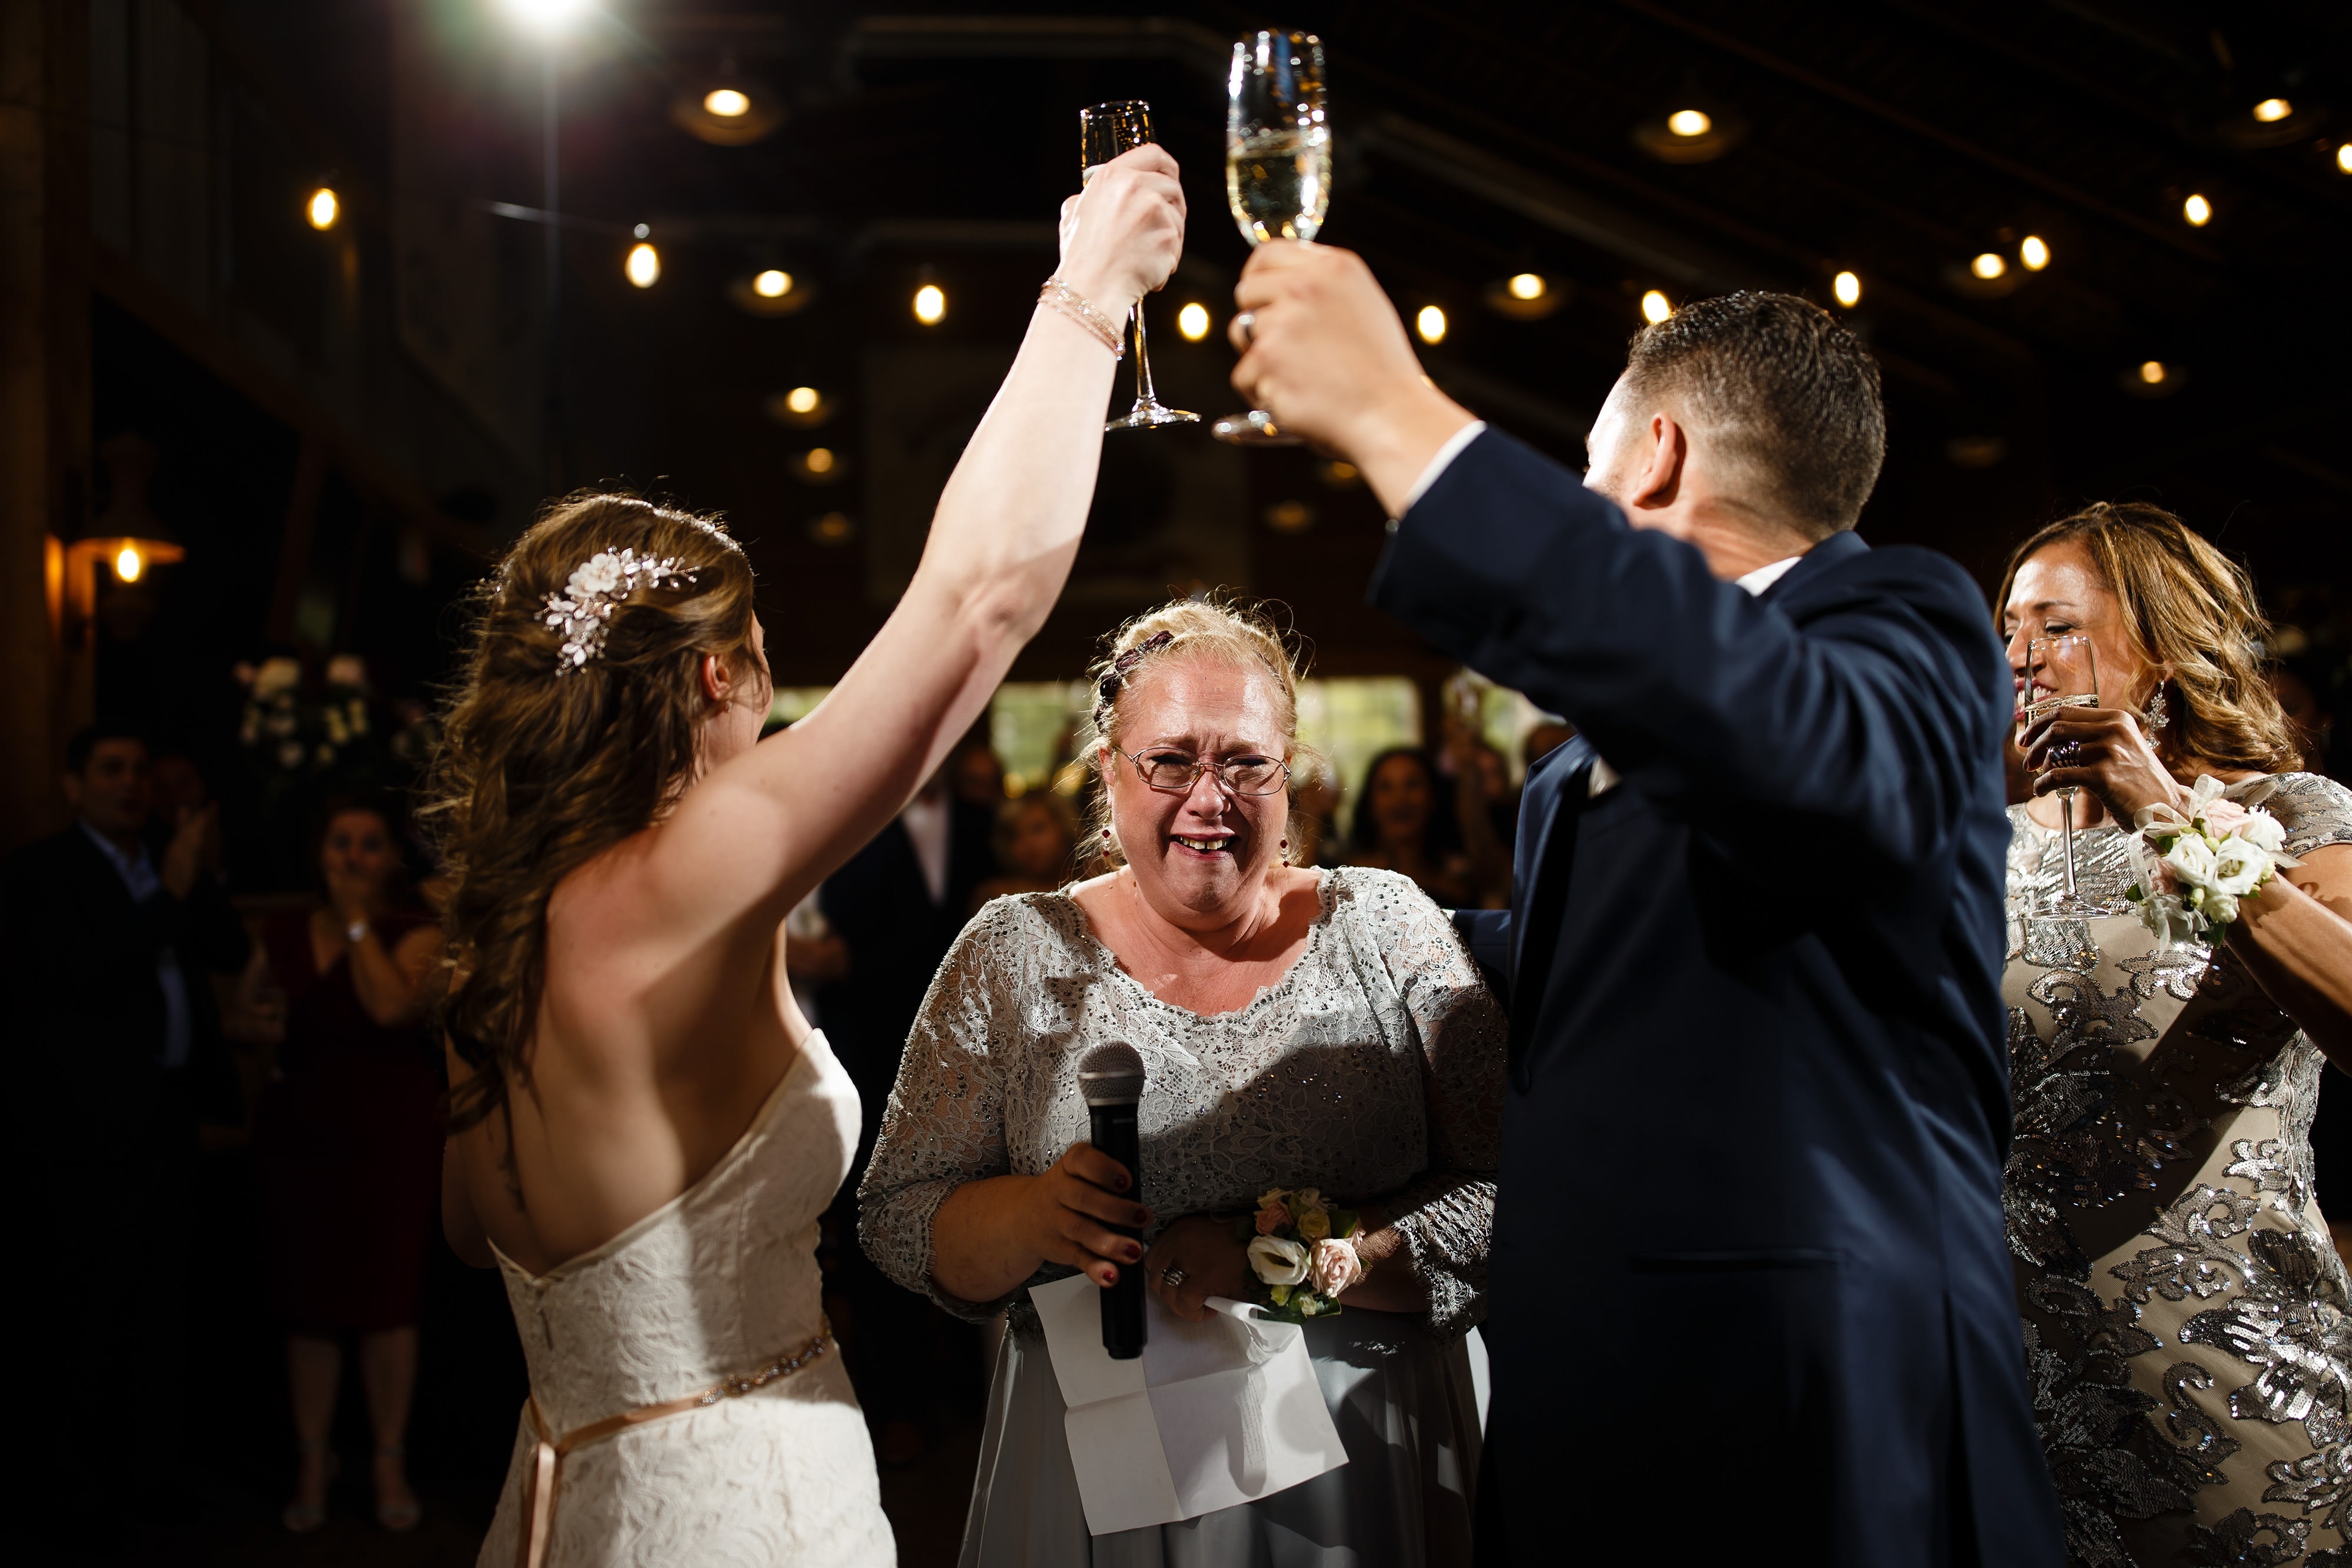 The couple toasts during their wedding